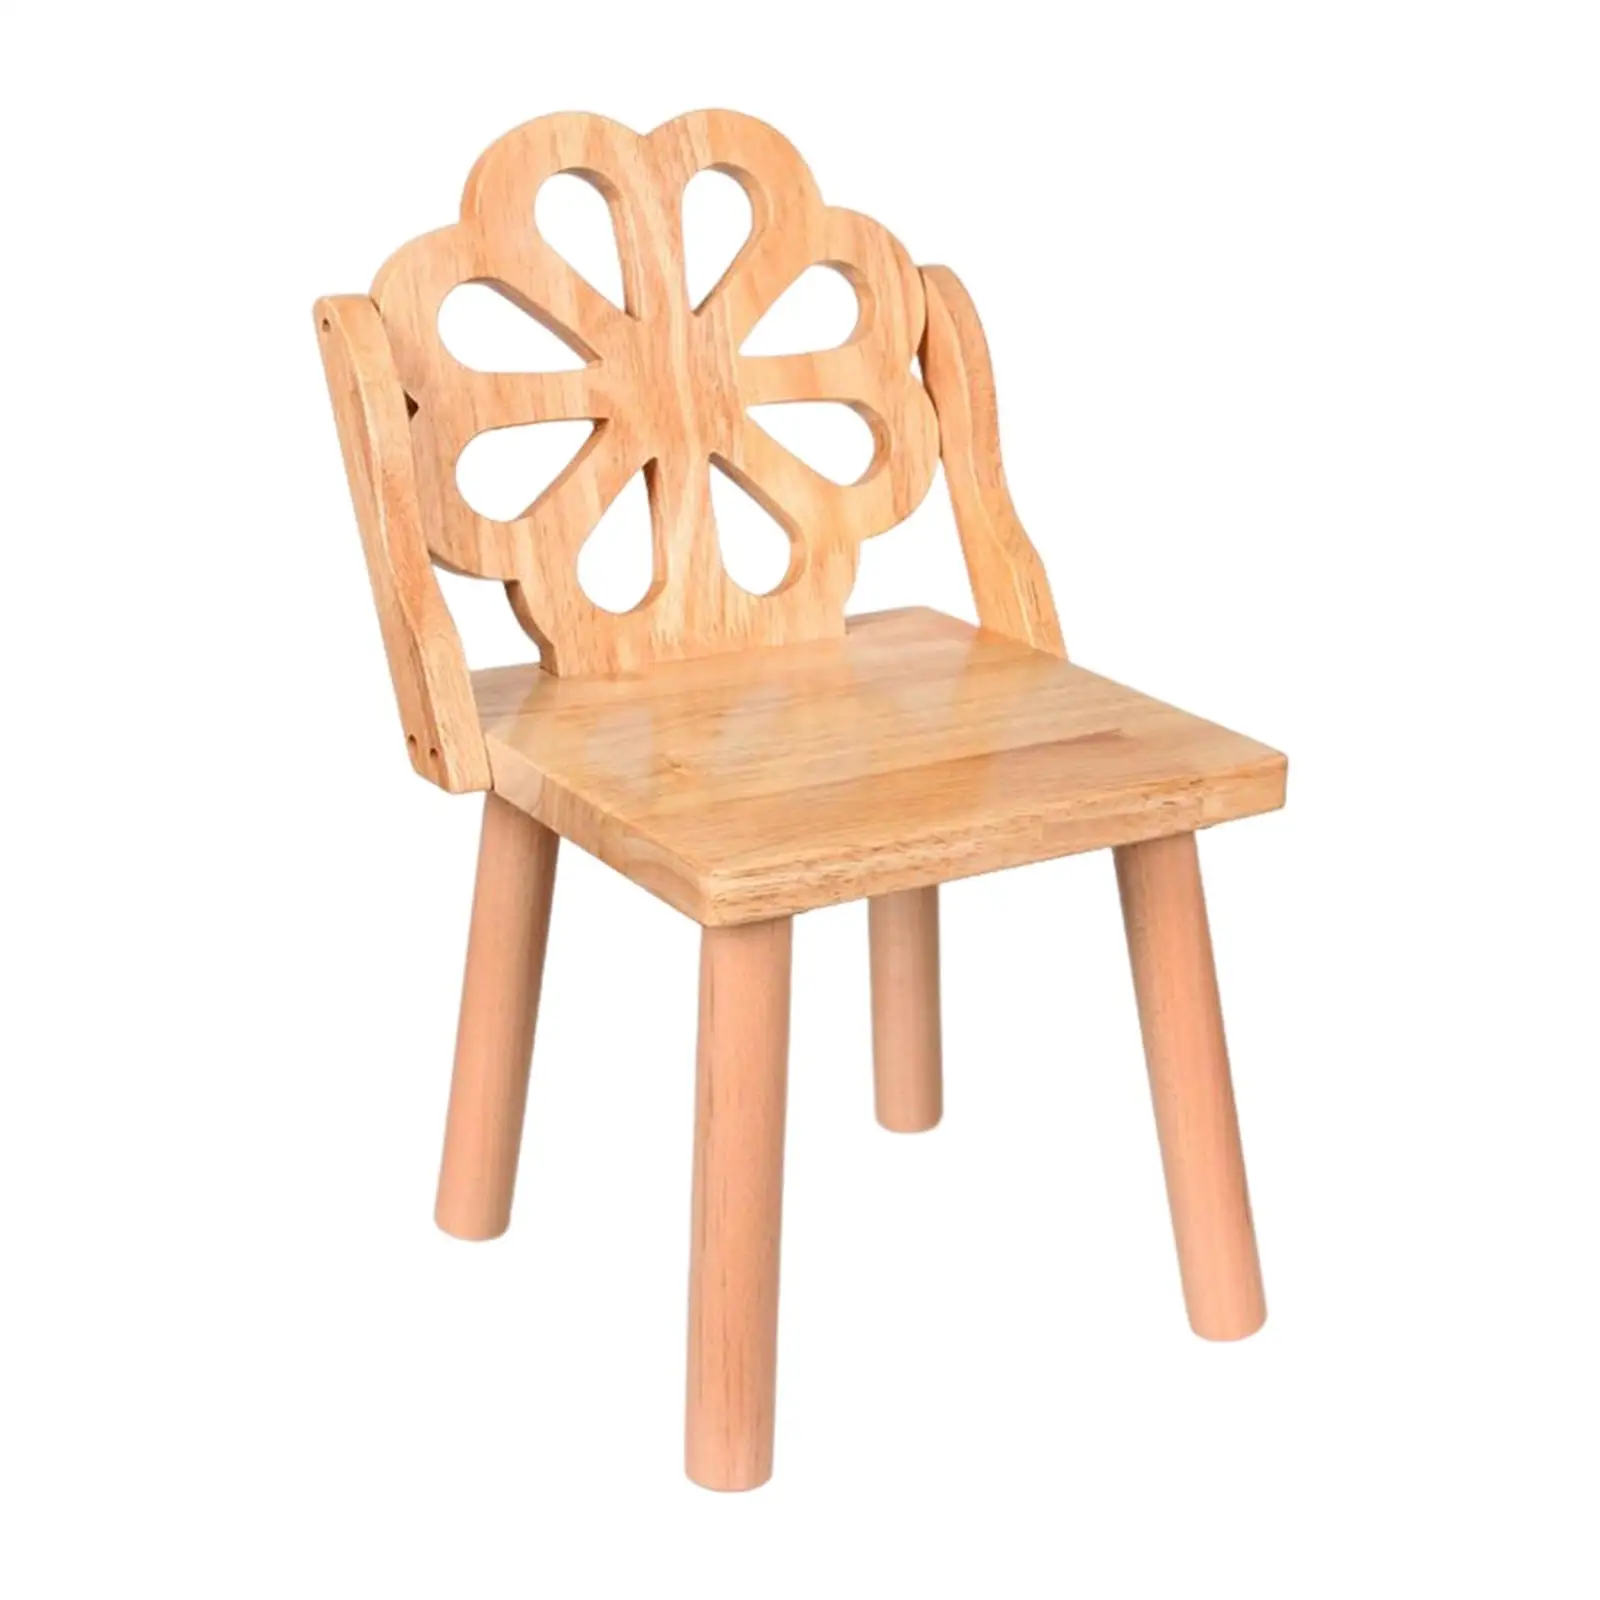 Removable Wooden Child Stool Wooden Toys for Children for Nursery School